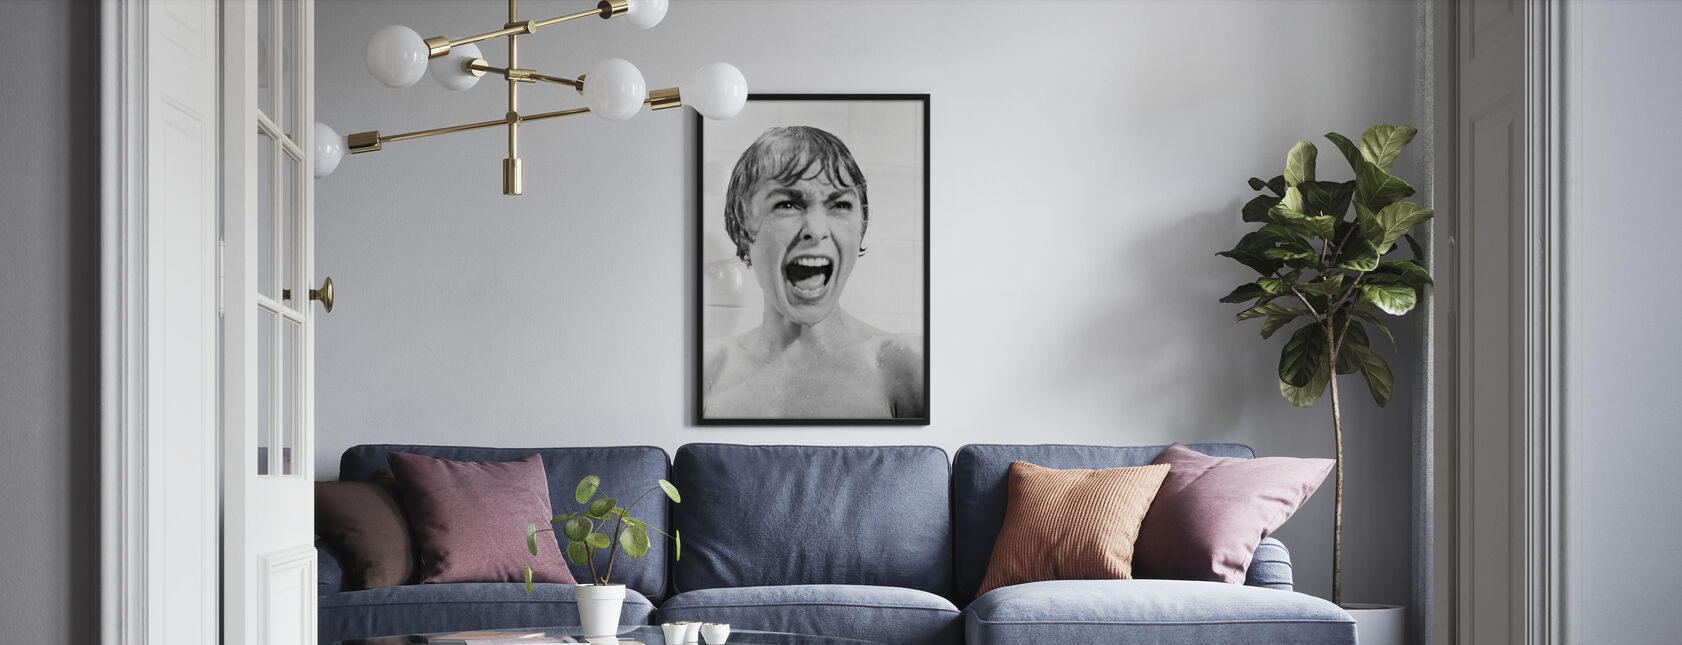 Janet Leigh in Psycho - Poster - Living Room